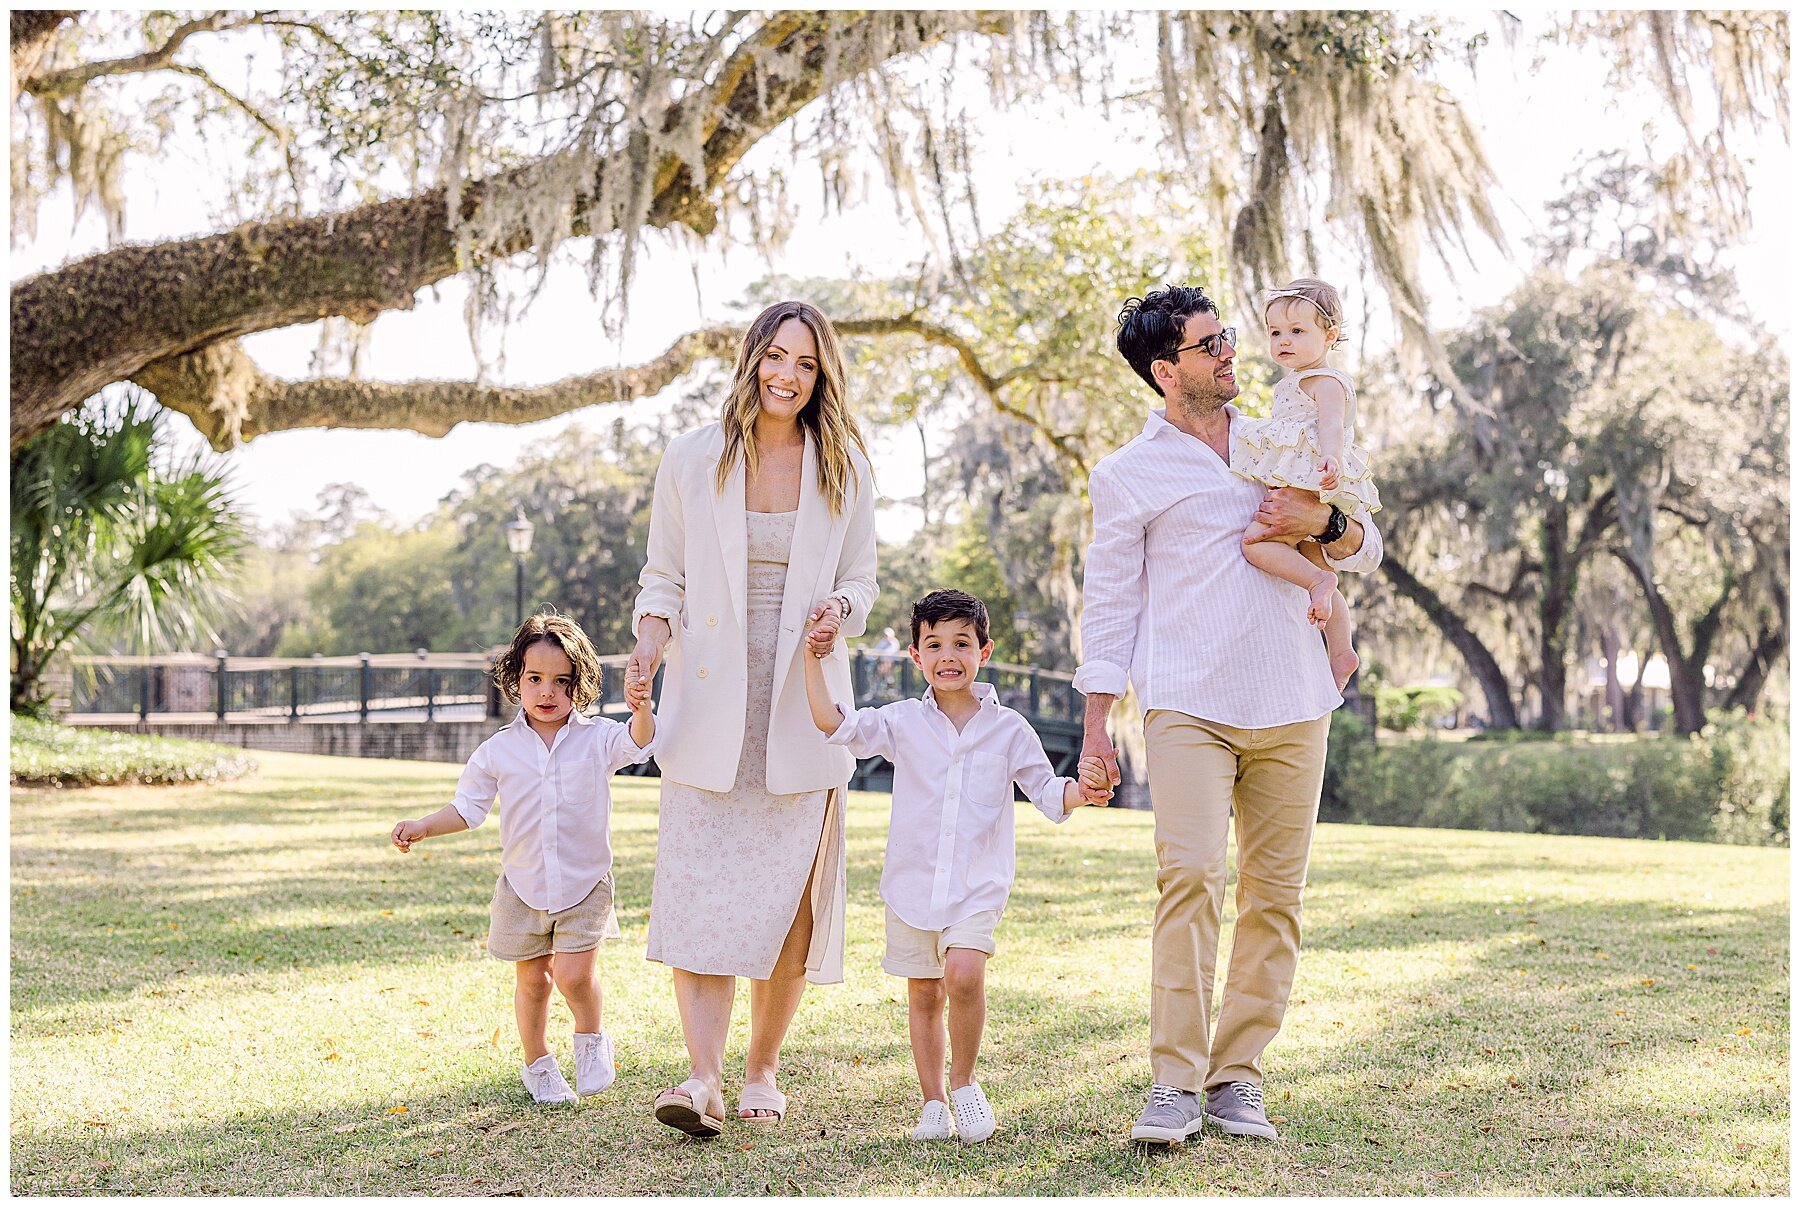 Katherine_Ives_Photography_Sallah_Palmetto_Bluff_Family_Session_12.JPG